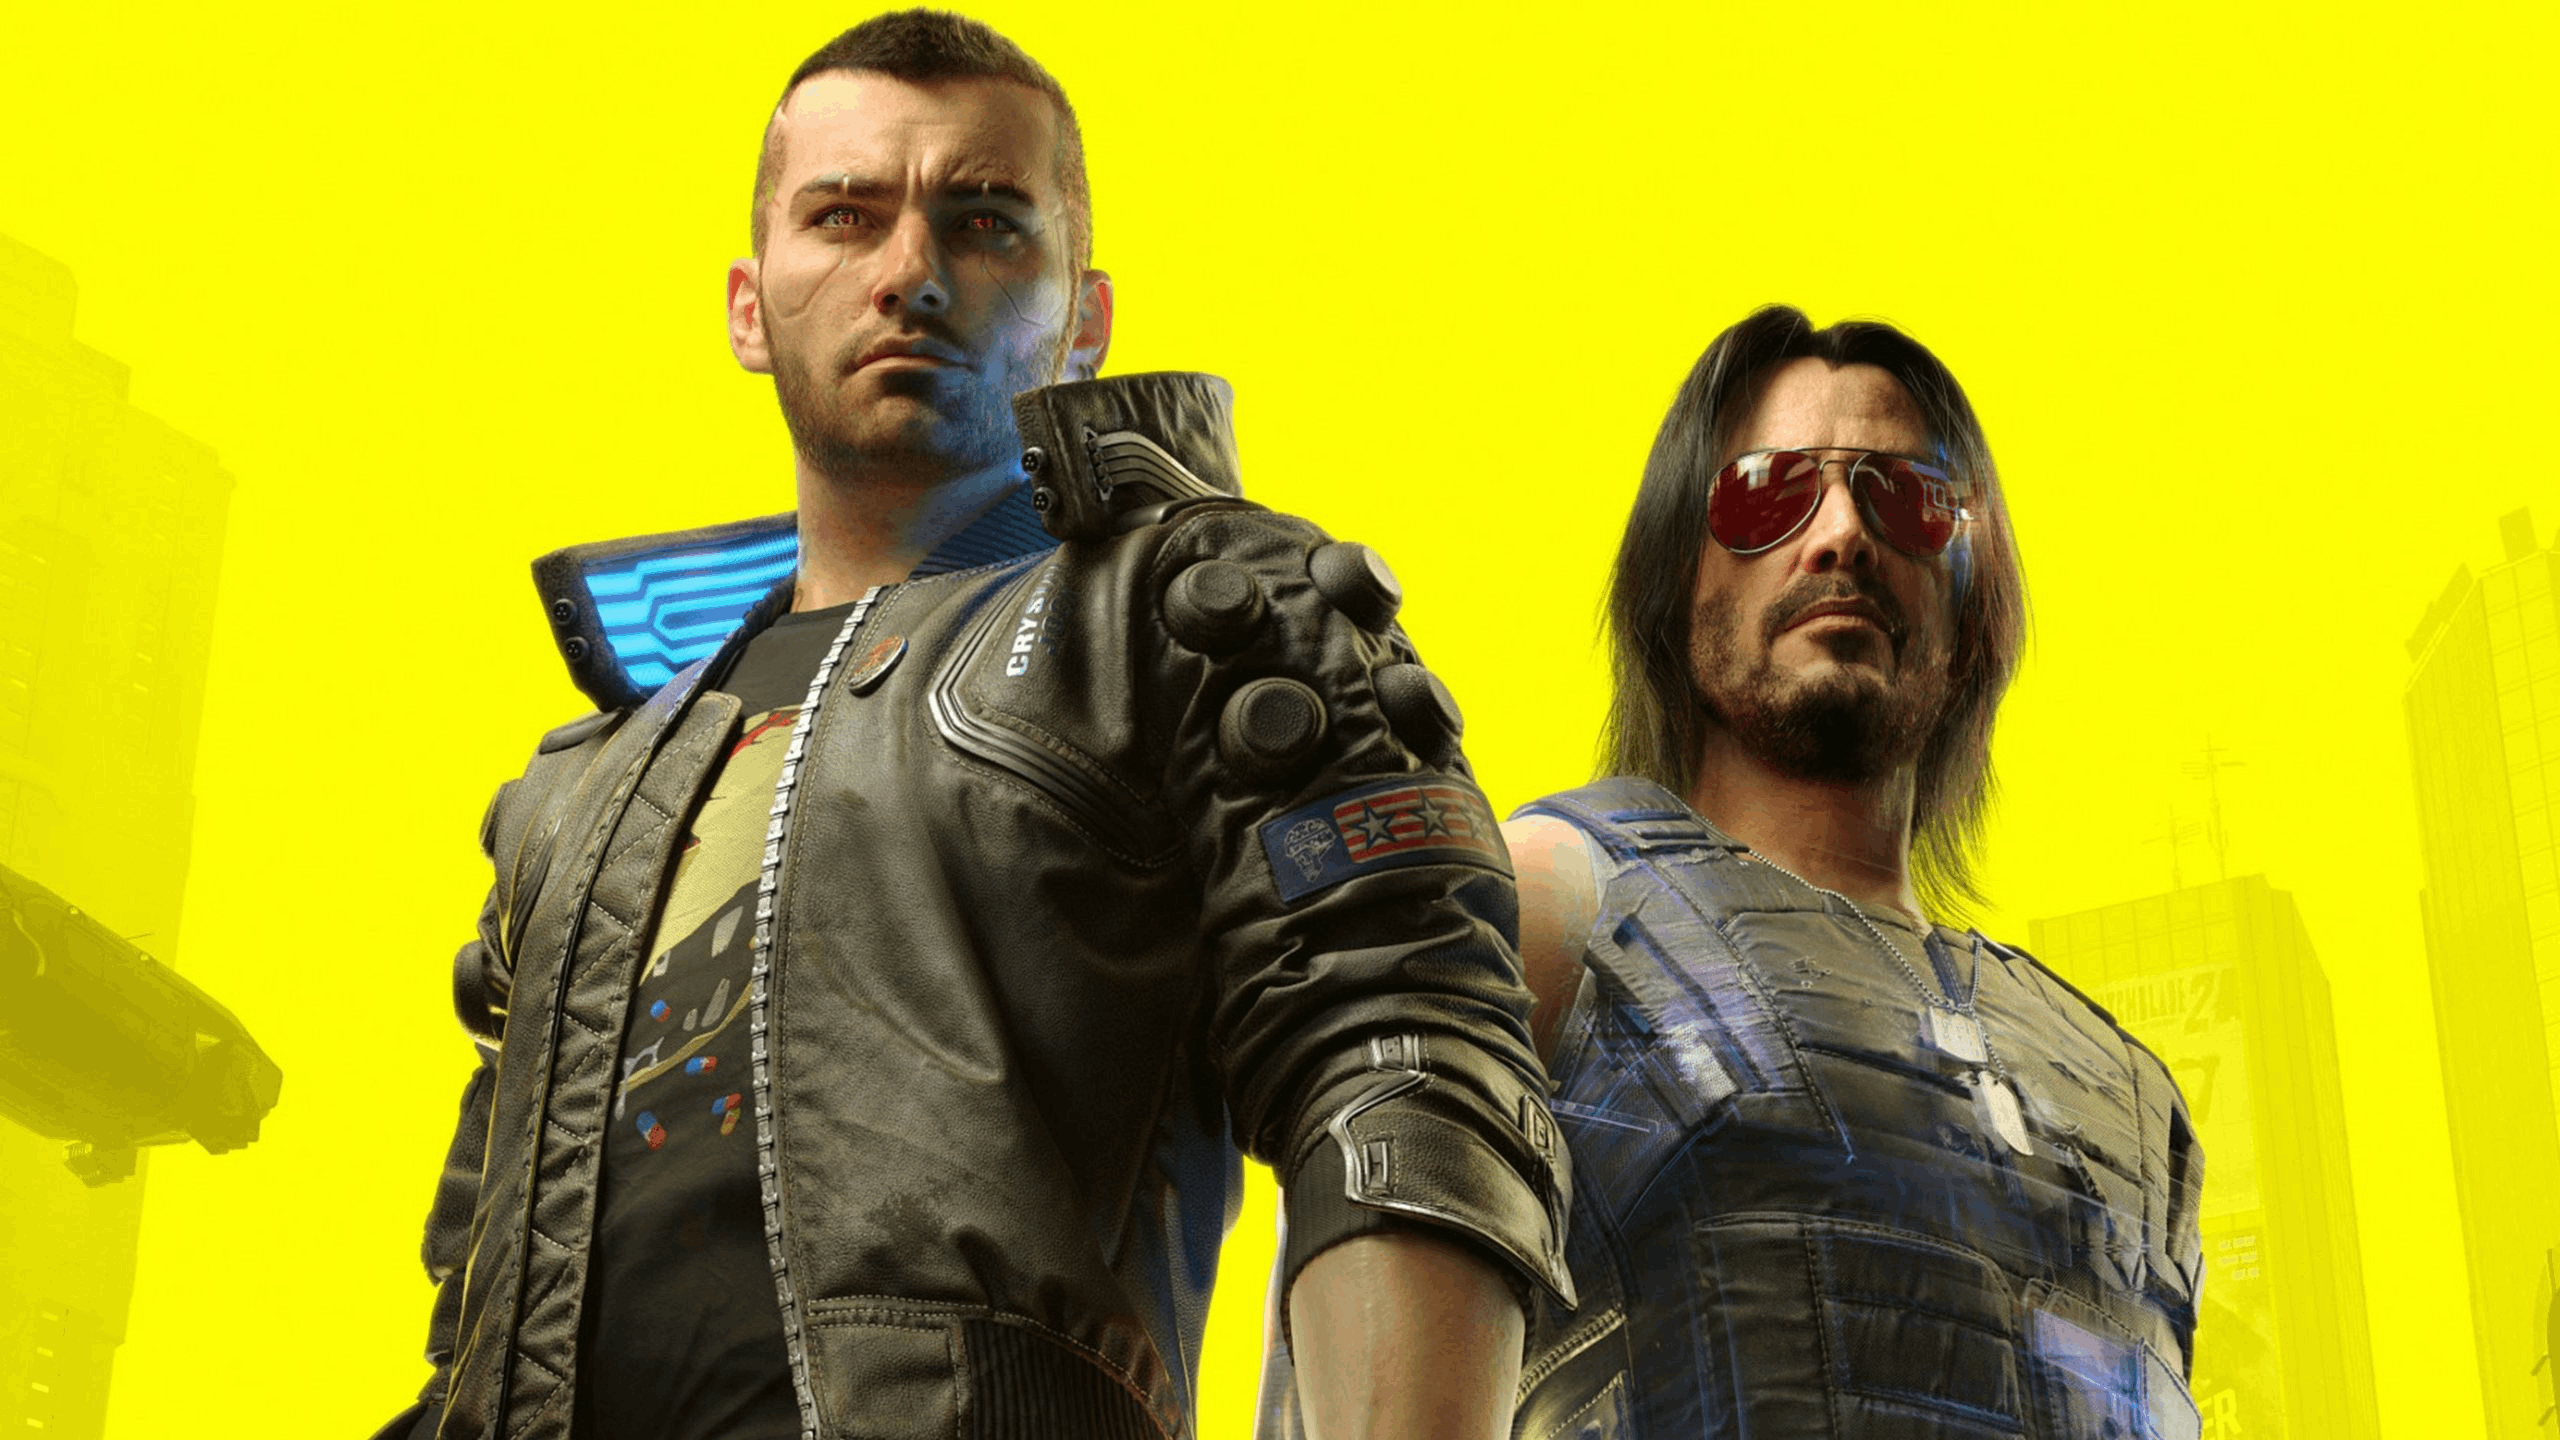 Cyberpunk 2077 for PS5 and Xbox X Series X|S, next-gen update now available